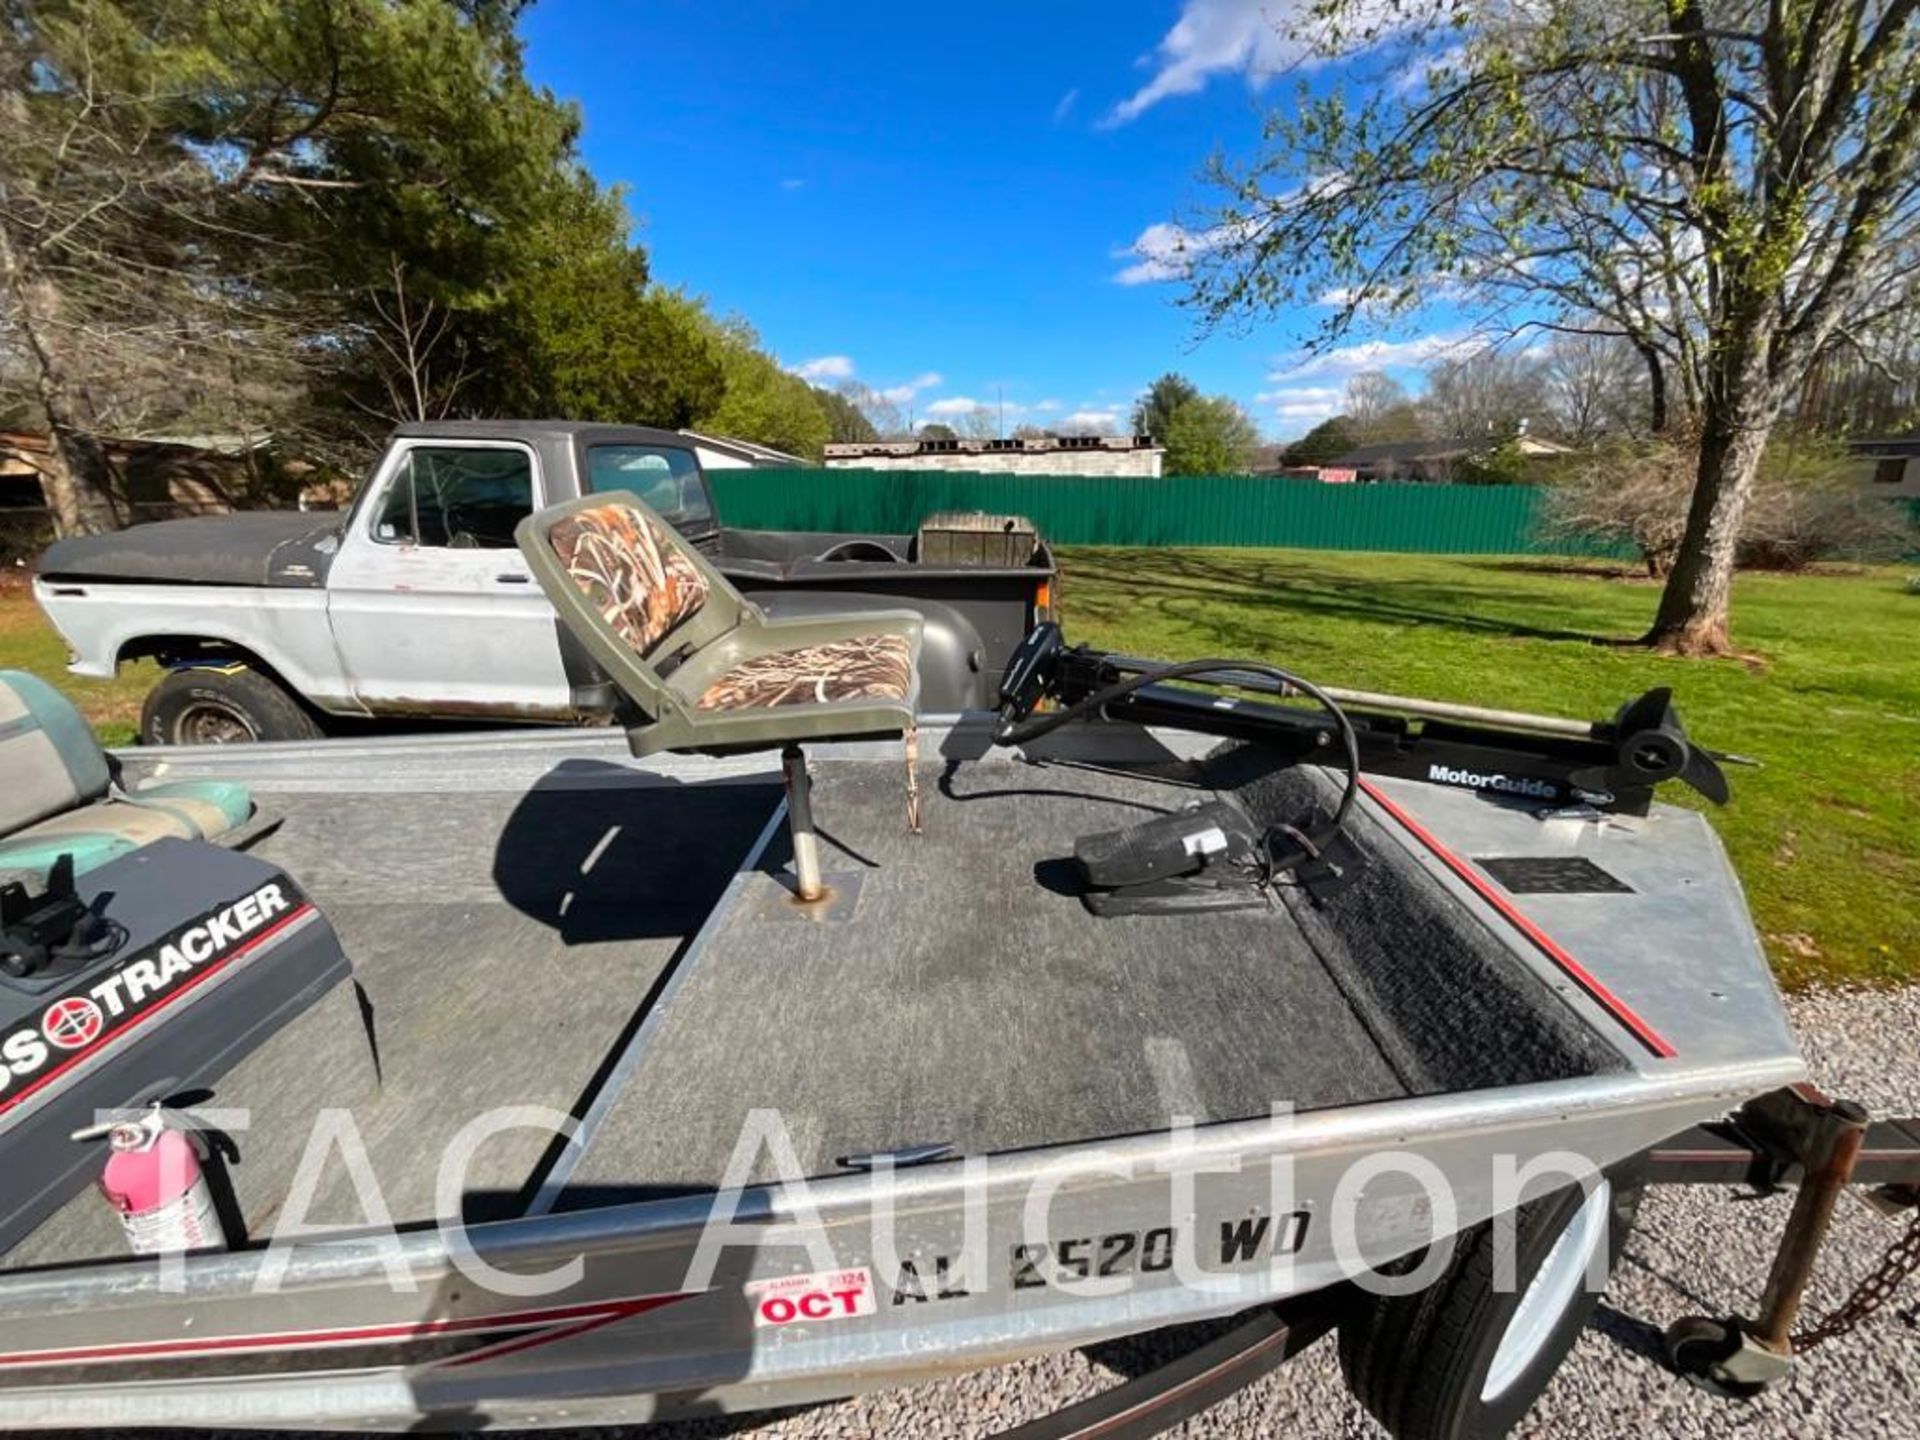 1989 Bass Tracker 17ft Bass Boat W/ Trailer - Image 11 of 52